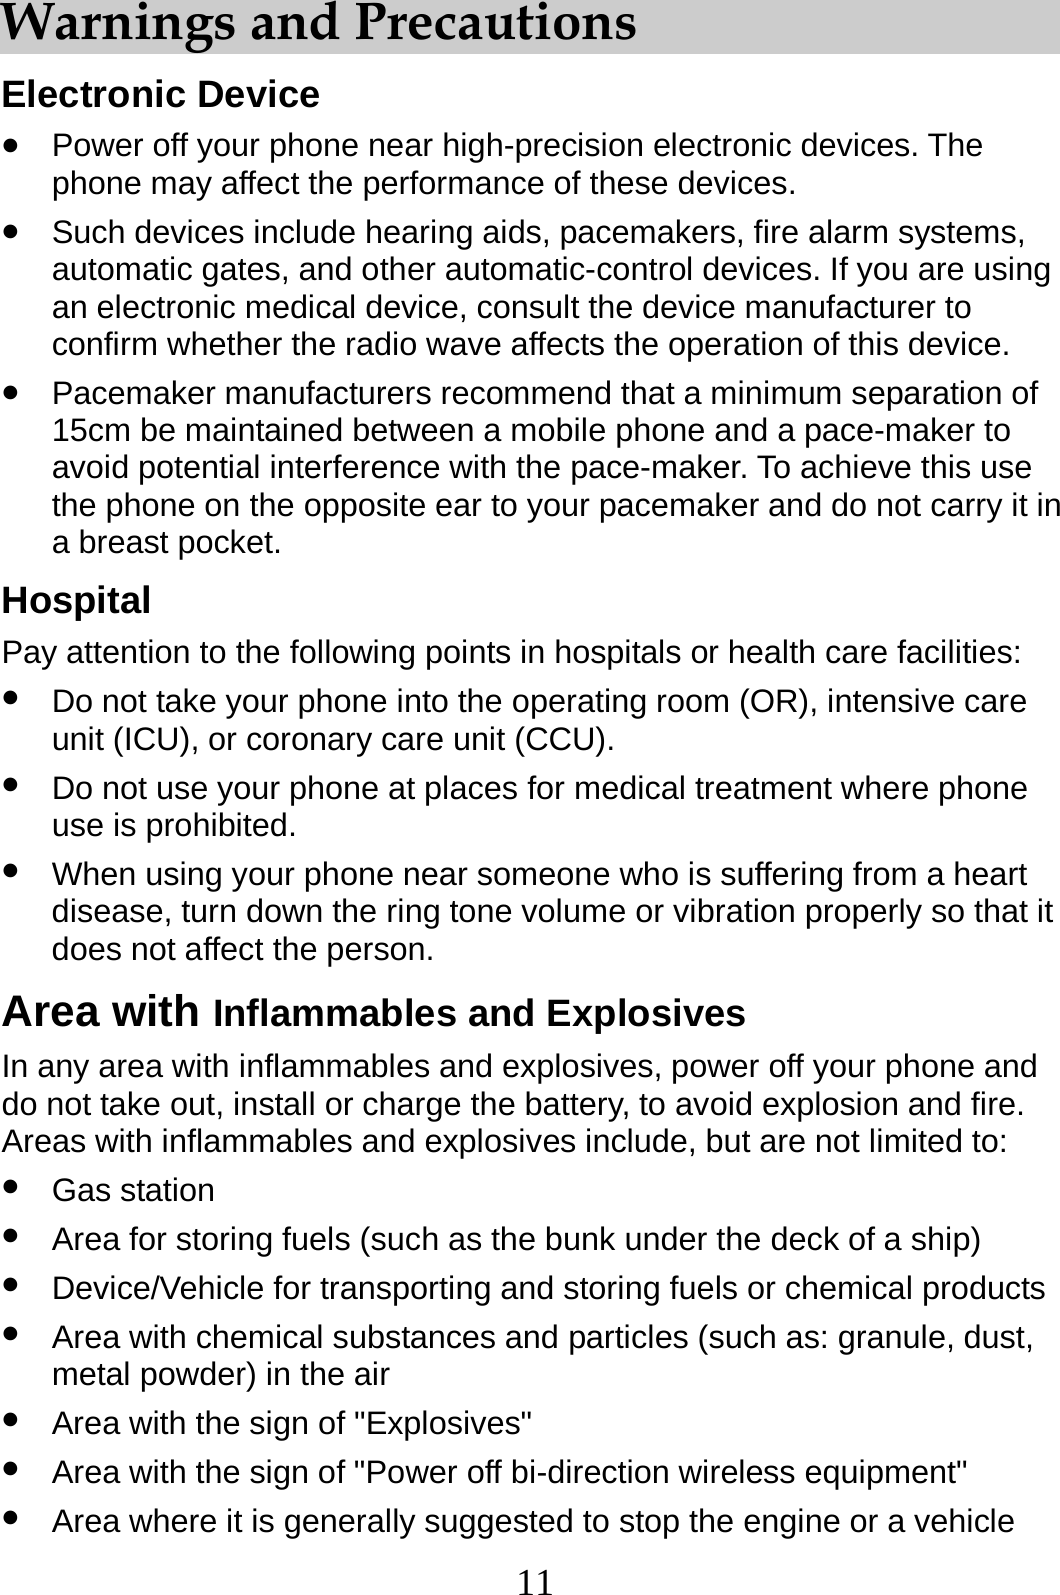 11 Warnings and Precautions Electronic Device z Power off your phone near high-precision electronic devices. The phone may affect the performance of these devices. z Such devices include hearing aids, pacemakers, fire alarm systems, automatic gates, and other automatic-control devices. If you are using an electronic medical device, consult the device manufacturer to confirm whether the radio wave affects the operation of this device. z Pacemaker manufacturers recommend that a minimum separation of 15cm be maintained between a mobile phone and a pace-maker to avoid potential interference with the pace-maker. To achieve this use the phone on the opposite ear to your pacemaker and do not carry it in a breast pocket. Hospital Pay attention to the following points in hospitals or health care facilities: z Do not take your phone into the operating room (OR), intensive care unit (ICU), or coronary care unit (CCU). z Do not use your phone at places for medical treatment where phone use is prohibited. z When using your phone near someone who is suffering from a heart disease, turn down the ring tone volume or vibration properly so that it does not affect the person. Area with Inflammables and Explosives In any area with inflammables and explosives, power off your phone and do not take out, install or charge the battery, to avoid explosion and fire. Areas with inflammables and explosives include, but are not limited to: z Gas station z Area for storing fuels (such as the bunk under the deck of a ship) z Device/Vehicle for transporting and storing fuels or chemical products z Area with chemical substances and particles (such as: granule, dust, metal powder) in the air z Area with the sign of &quot;Explosives&quot; z Area with the sign of &quot;Power off bi-direction wireless equipment&quot; z Area where it is generally suggested to stop the engine or a vehicle 